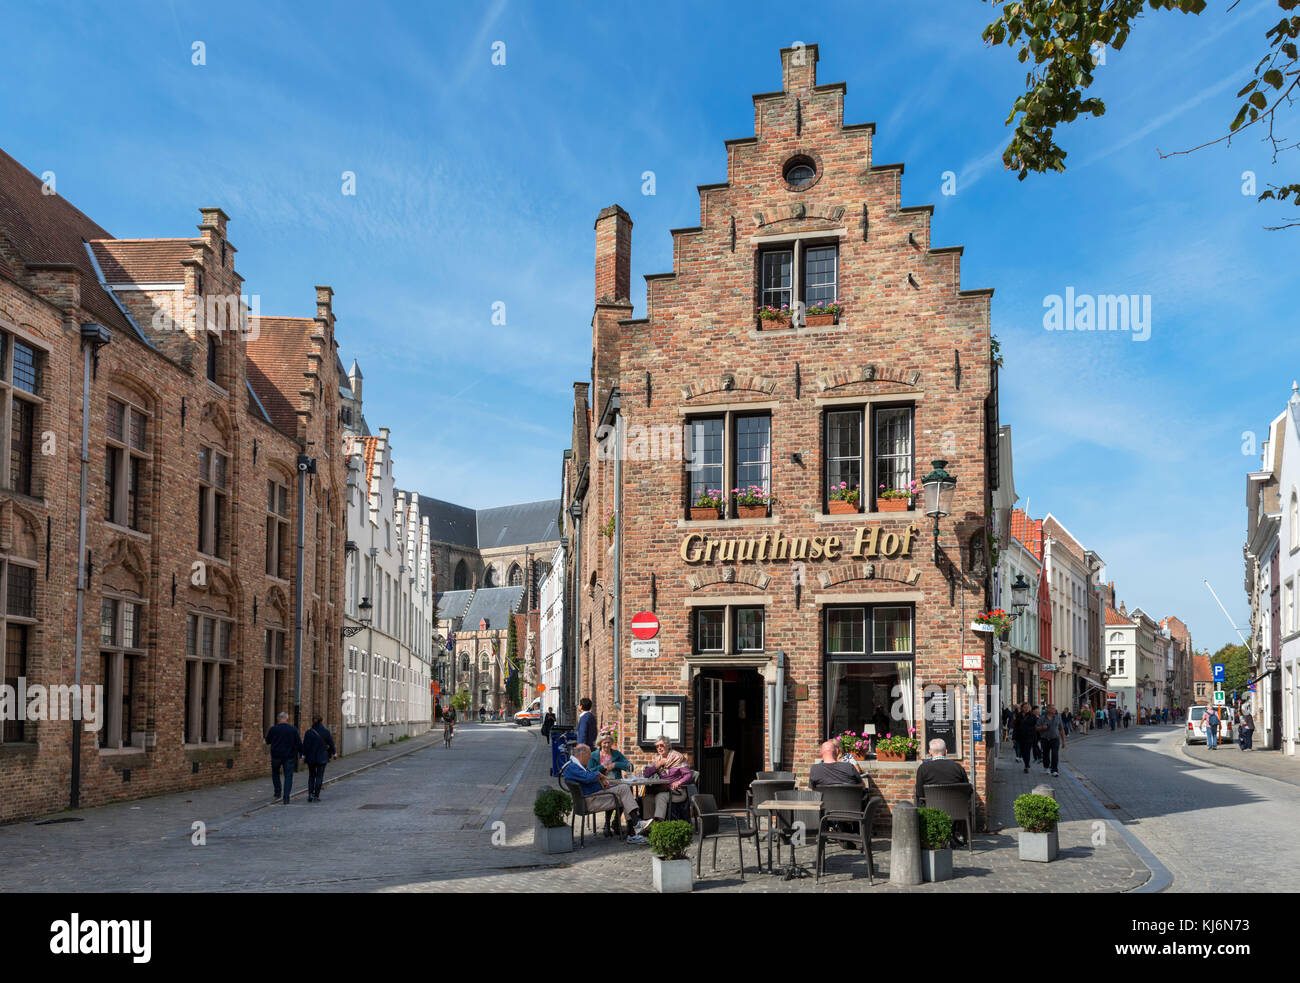 Gruuthuse Hof bar on Mariastraat in the city centre, Bruges (Brugge), Belgium. Stock Photo